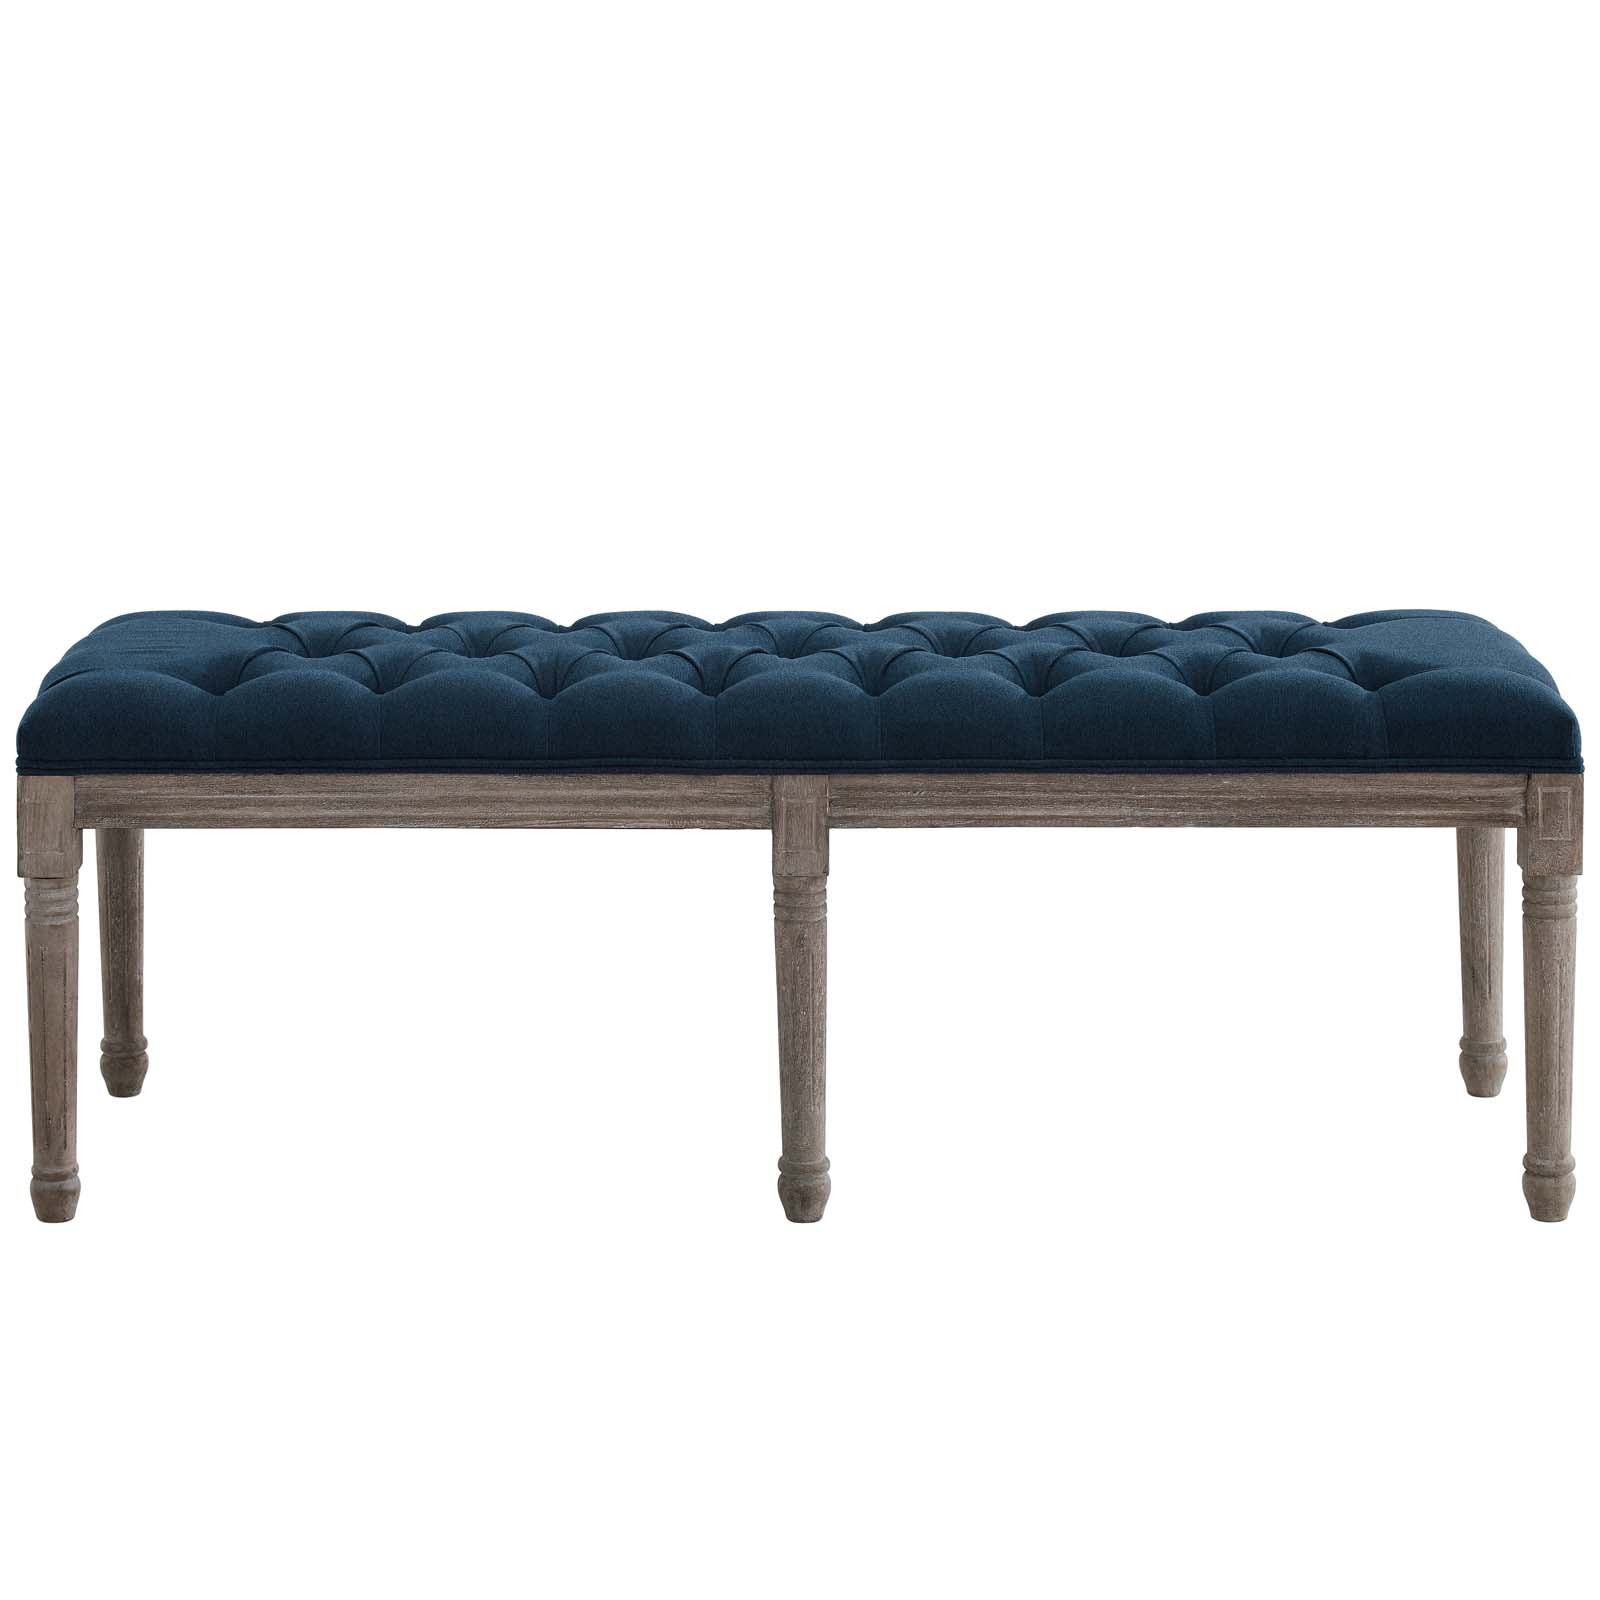 Modway Benches - Province French Vintage Upholstered Fabric Bench Navy